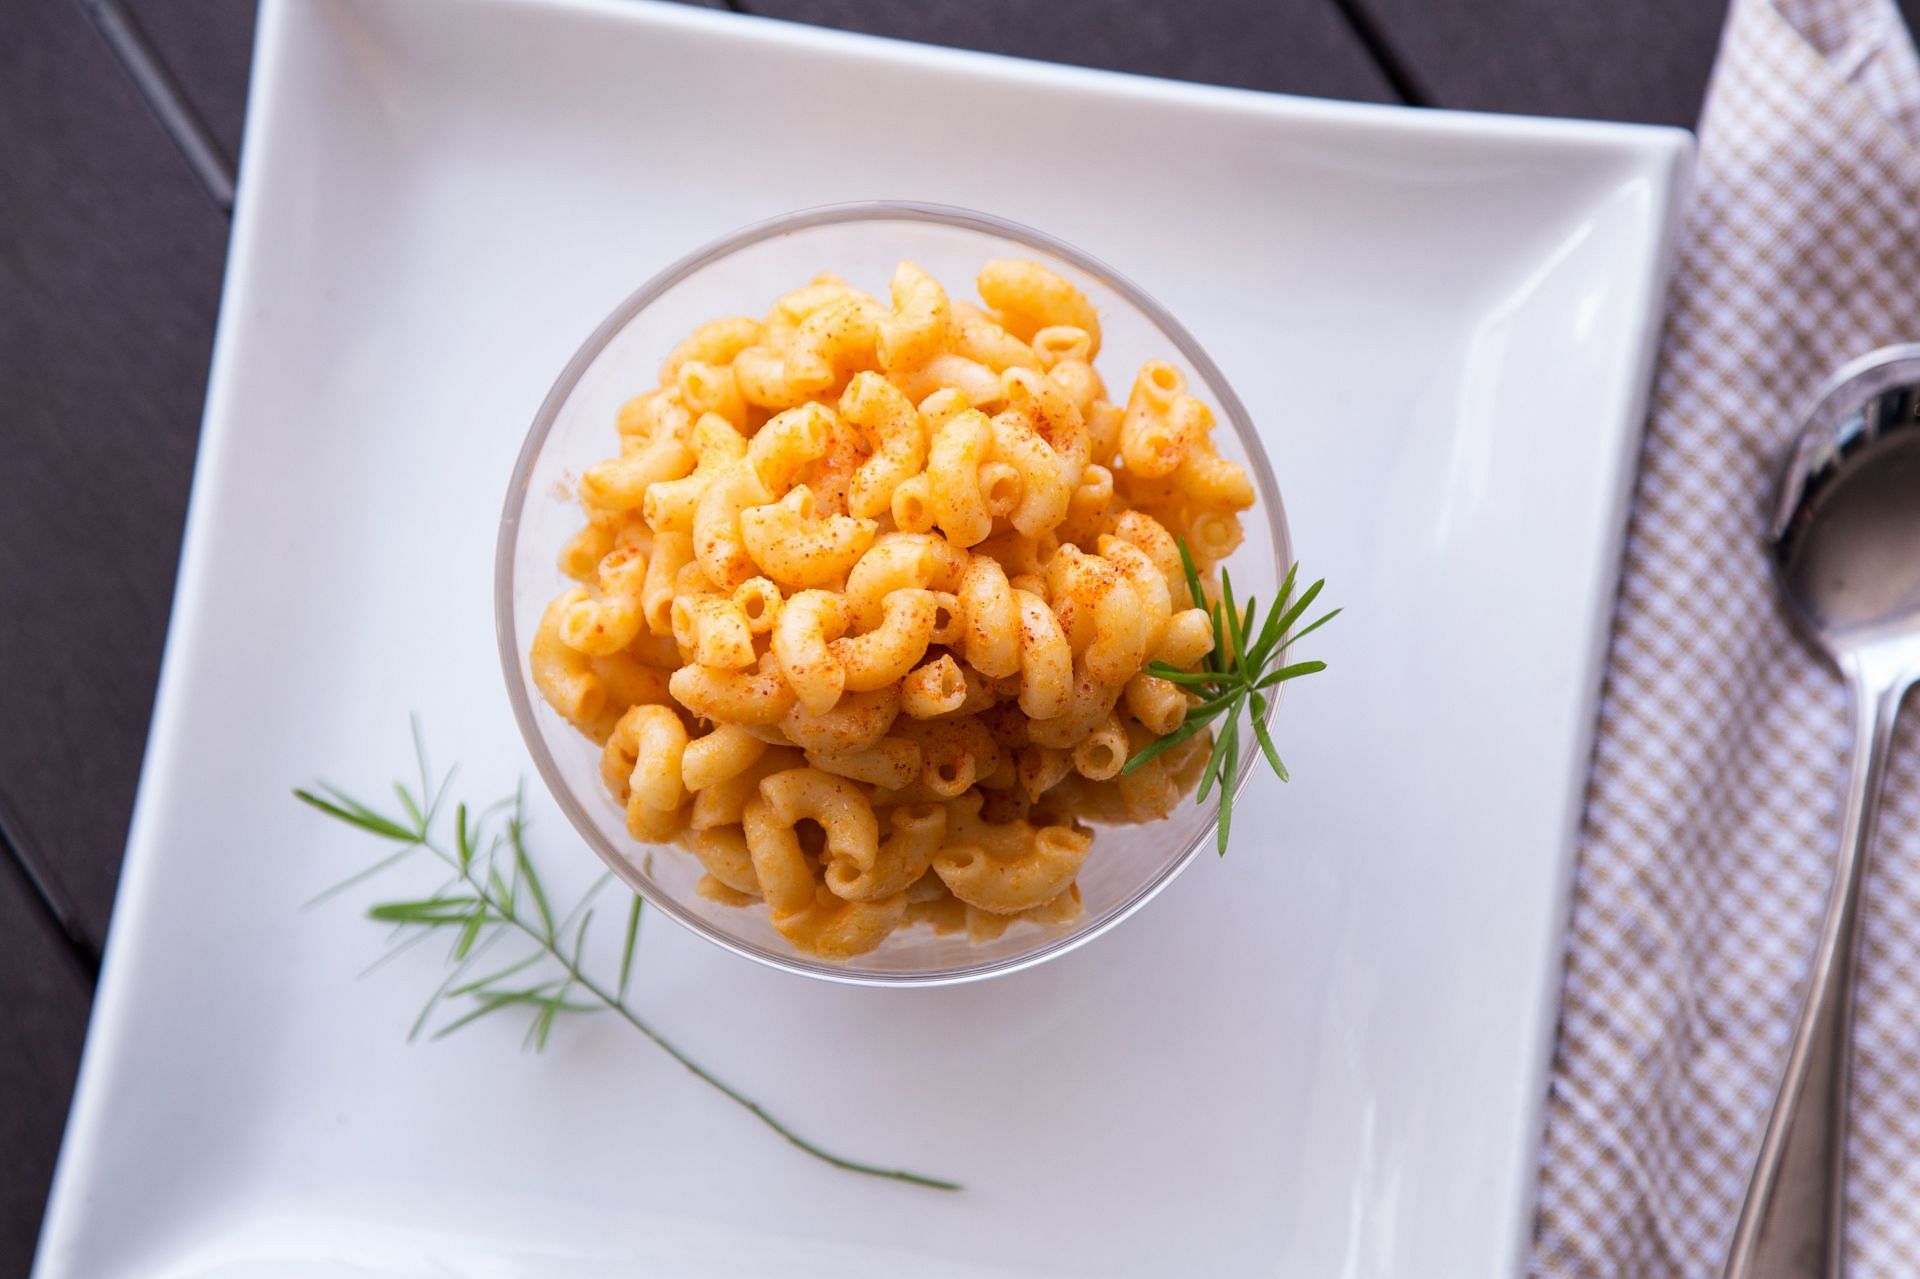 All about Kraft Mac and Cheese (Image via Unsplash/Hermes Rivera)